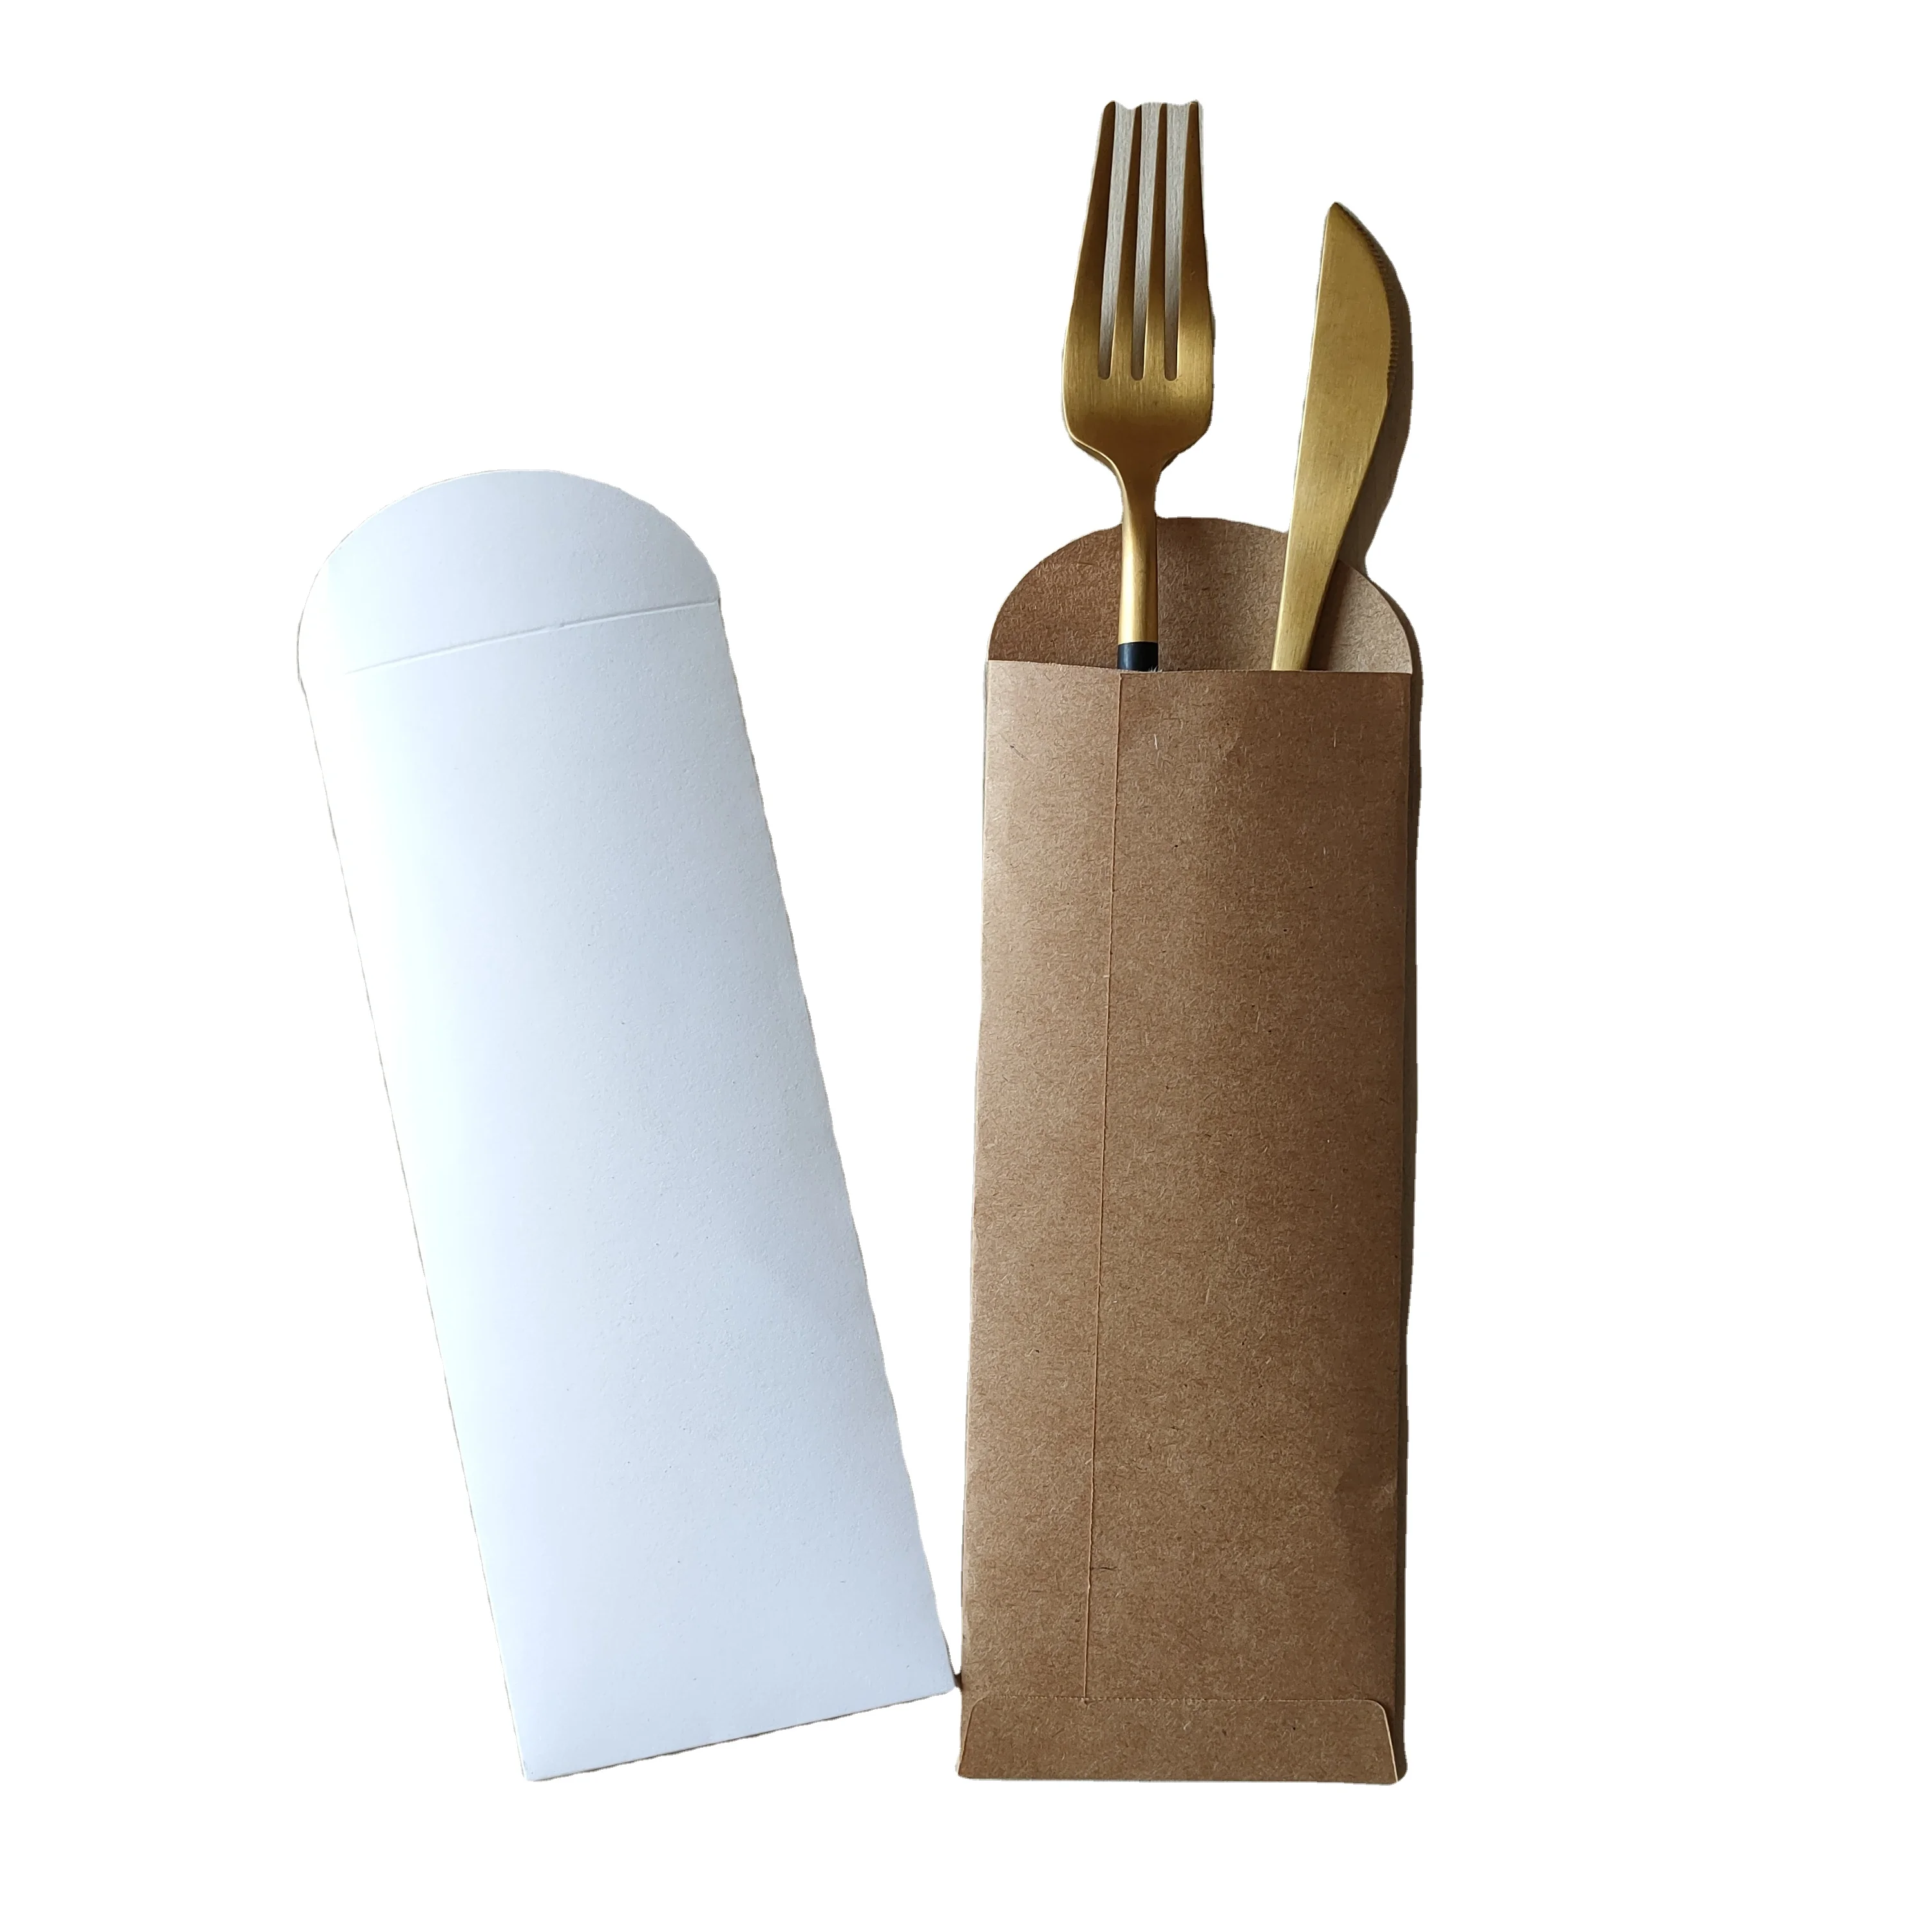 Pack of 50 Natural Kraft Paper Silverware Bags Flat 3 x 7.5 Pocket Sleeves for Cutlery and Utensils Placesettings 